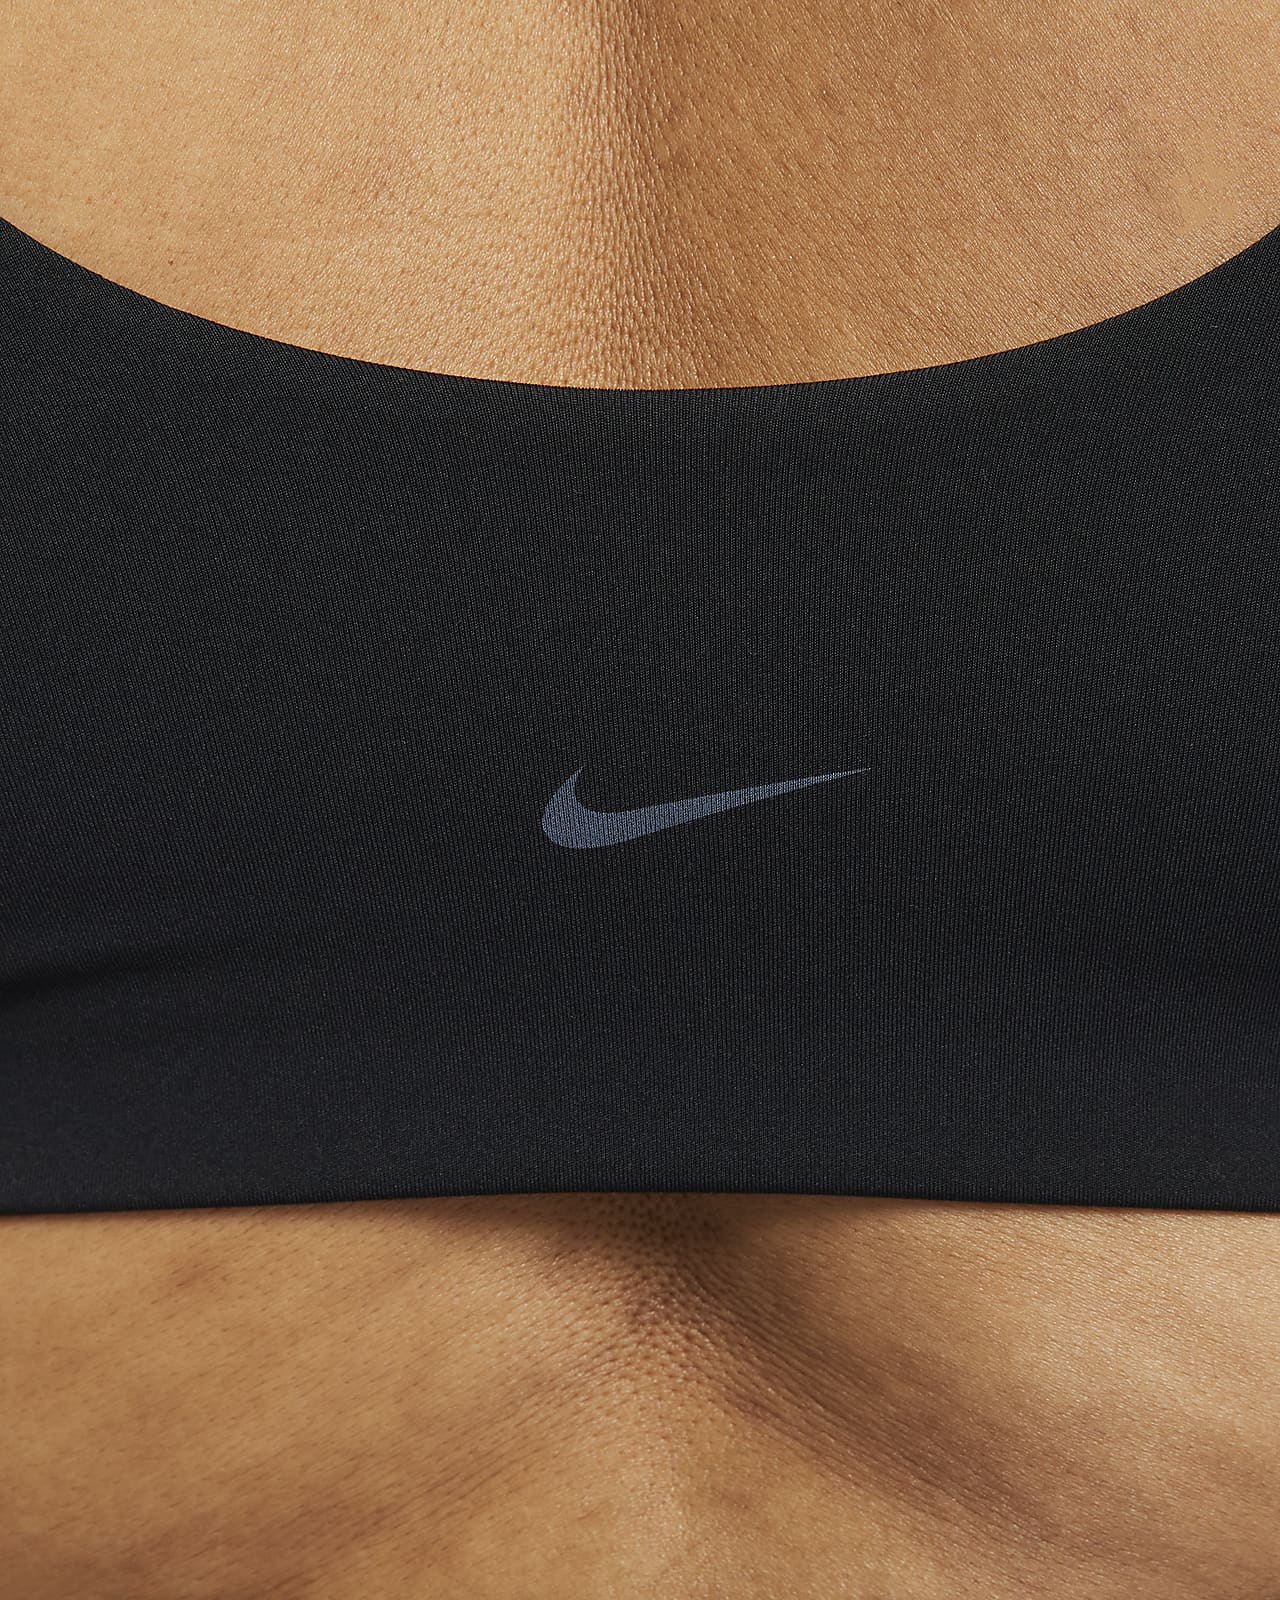 Buy Nike Alate All U Women's Light-Support Lightly Lined Scoop-Neck Printed Sports  Bra 2024 Online